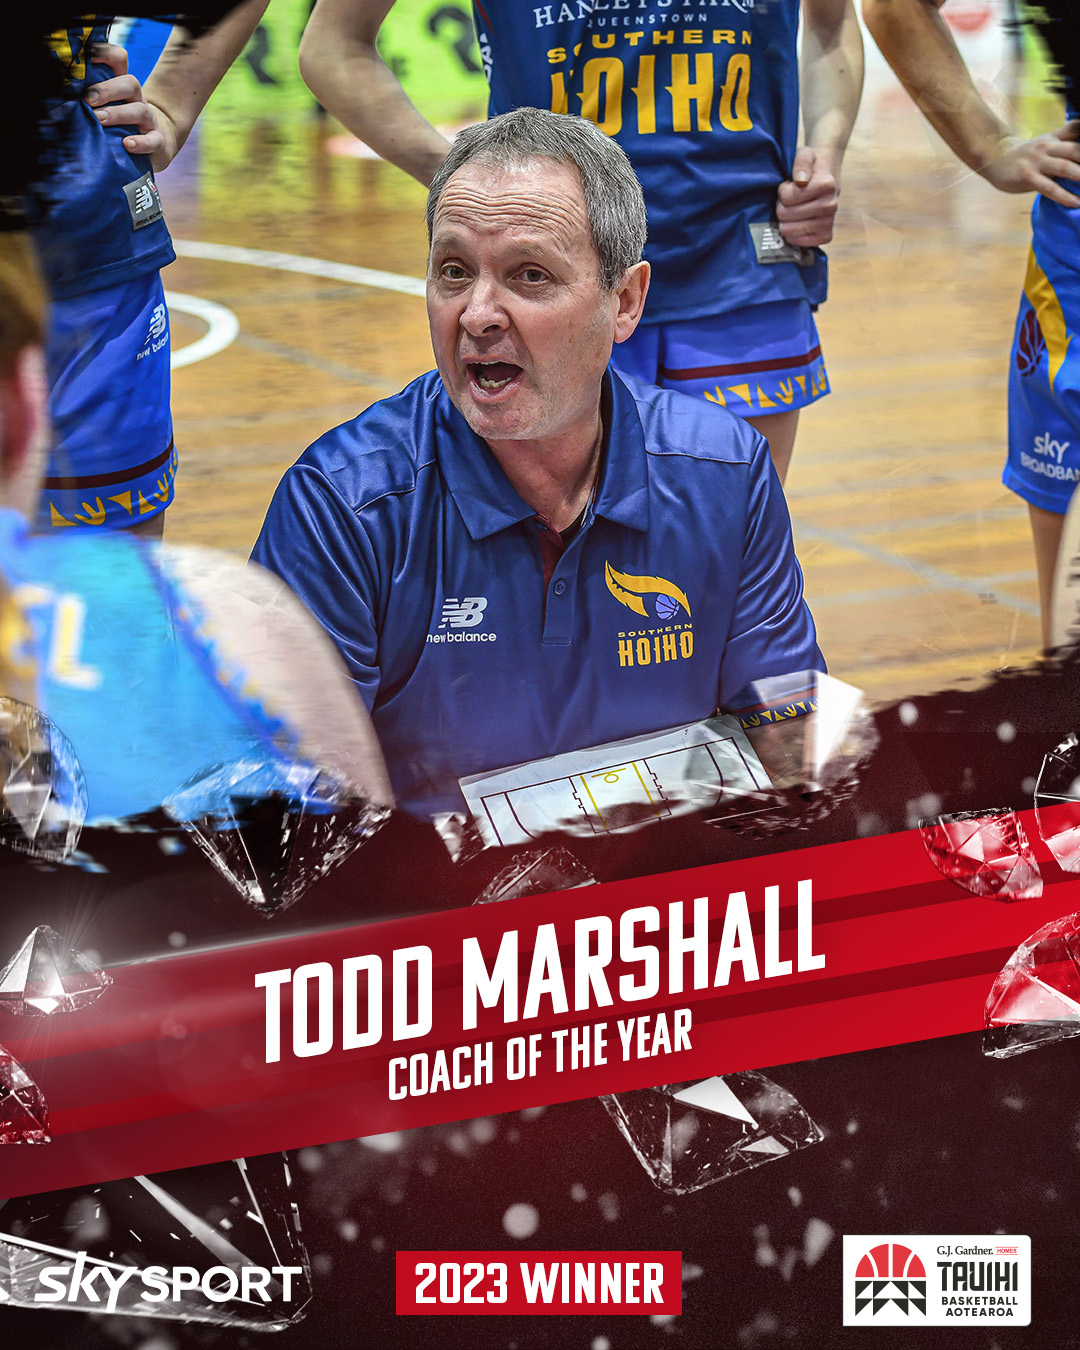 Coach of the Year (Todd Marshall)